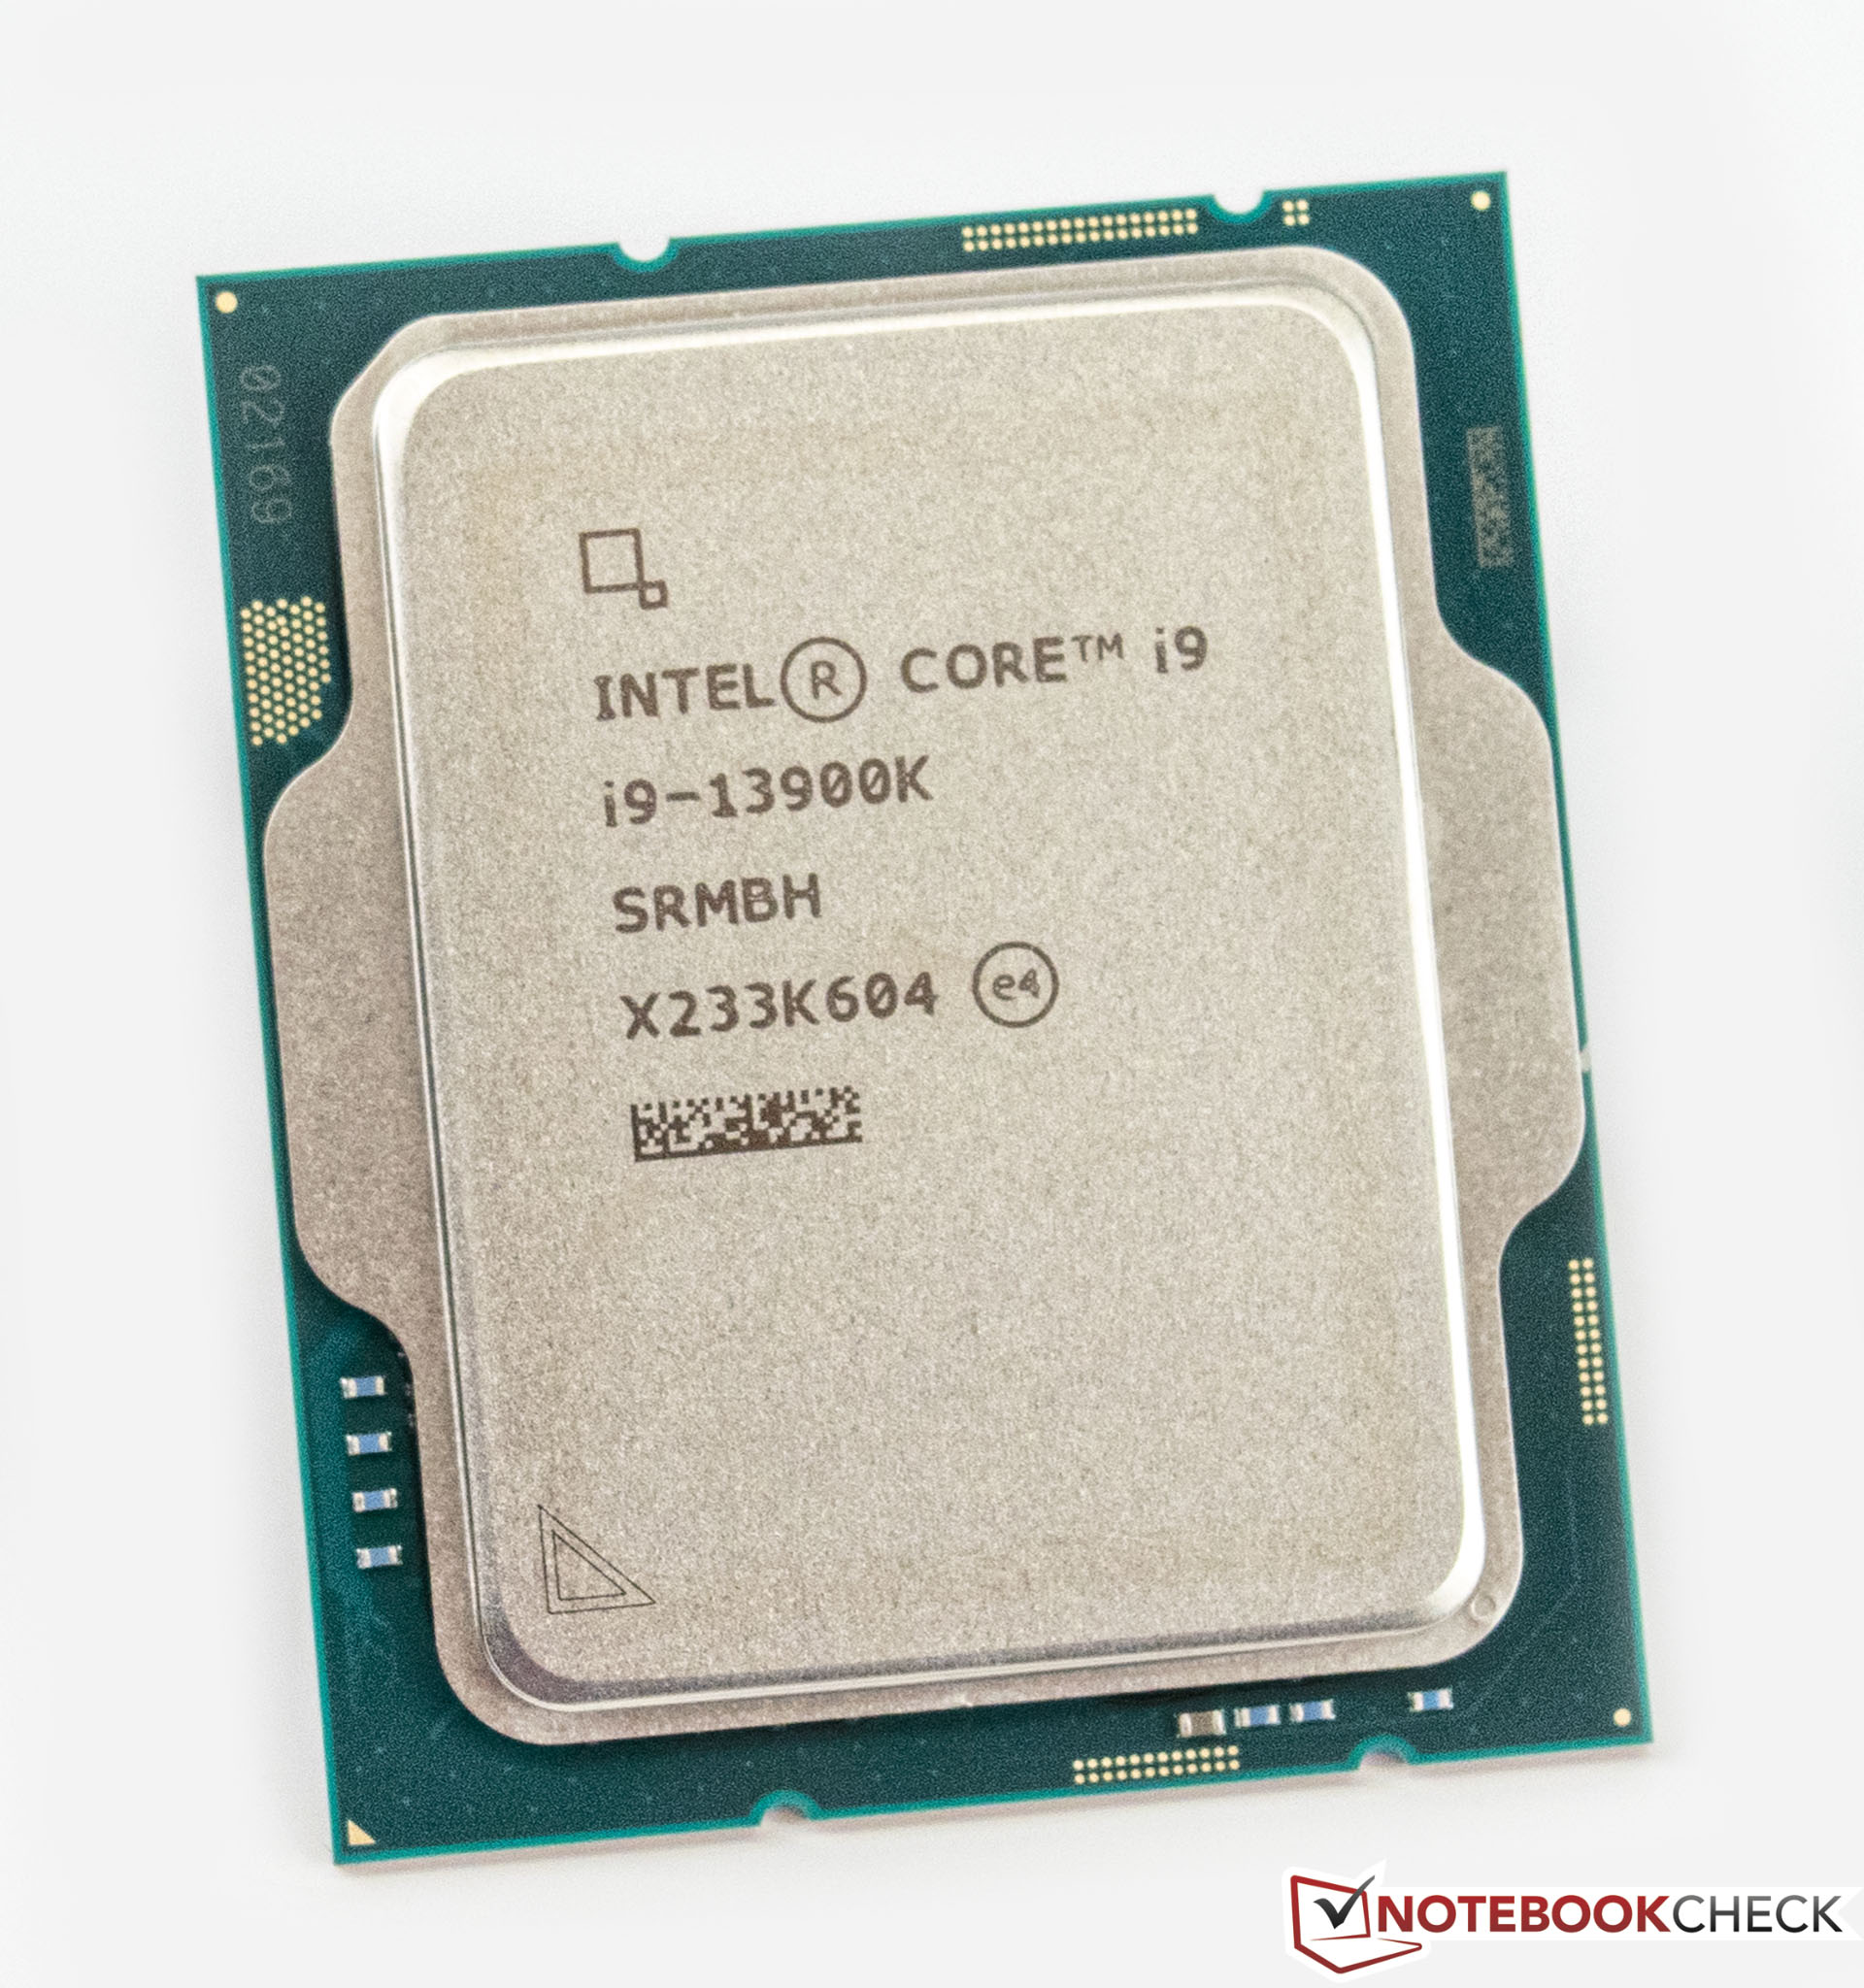 Intel Core i9-13900K Processor - Benchmarks and Specs 